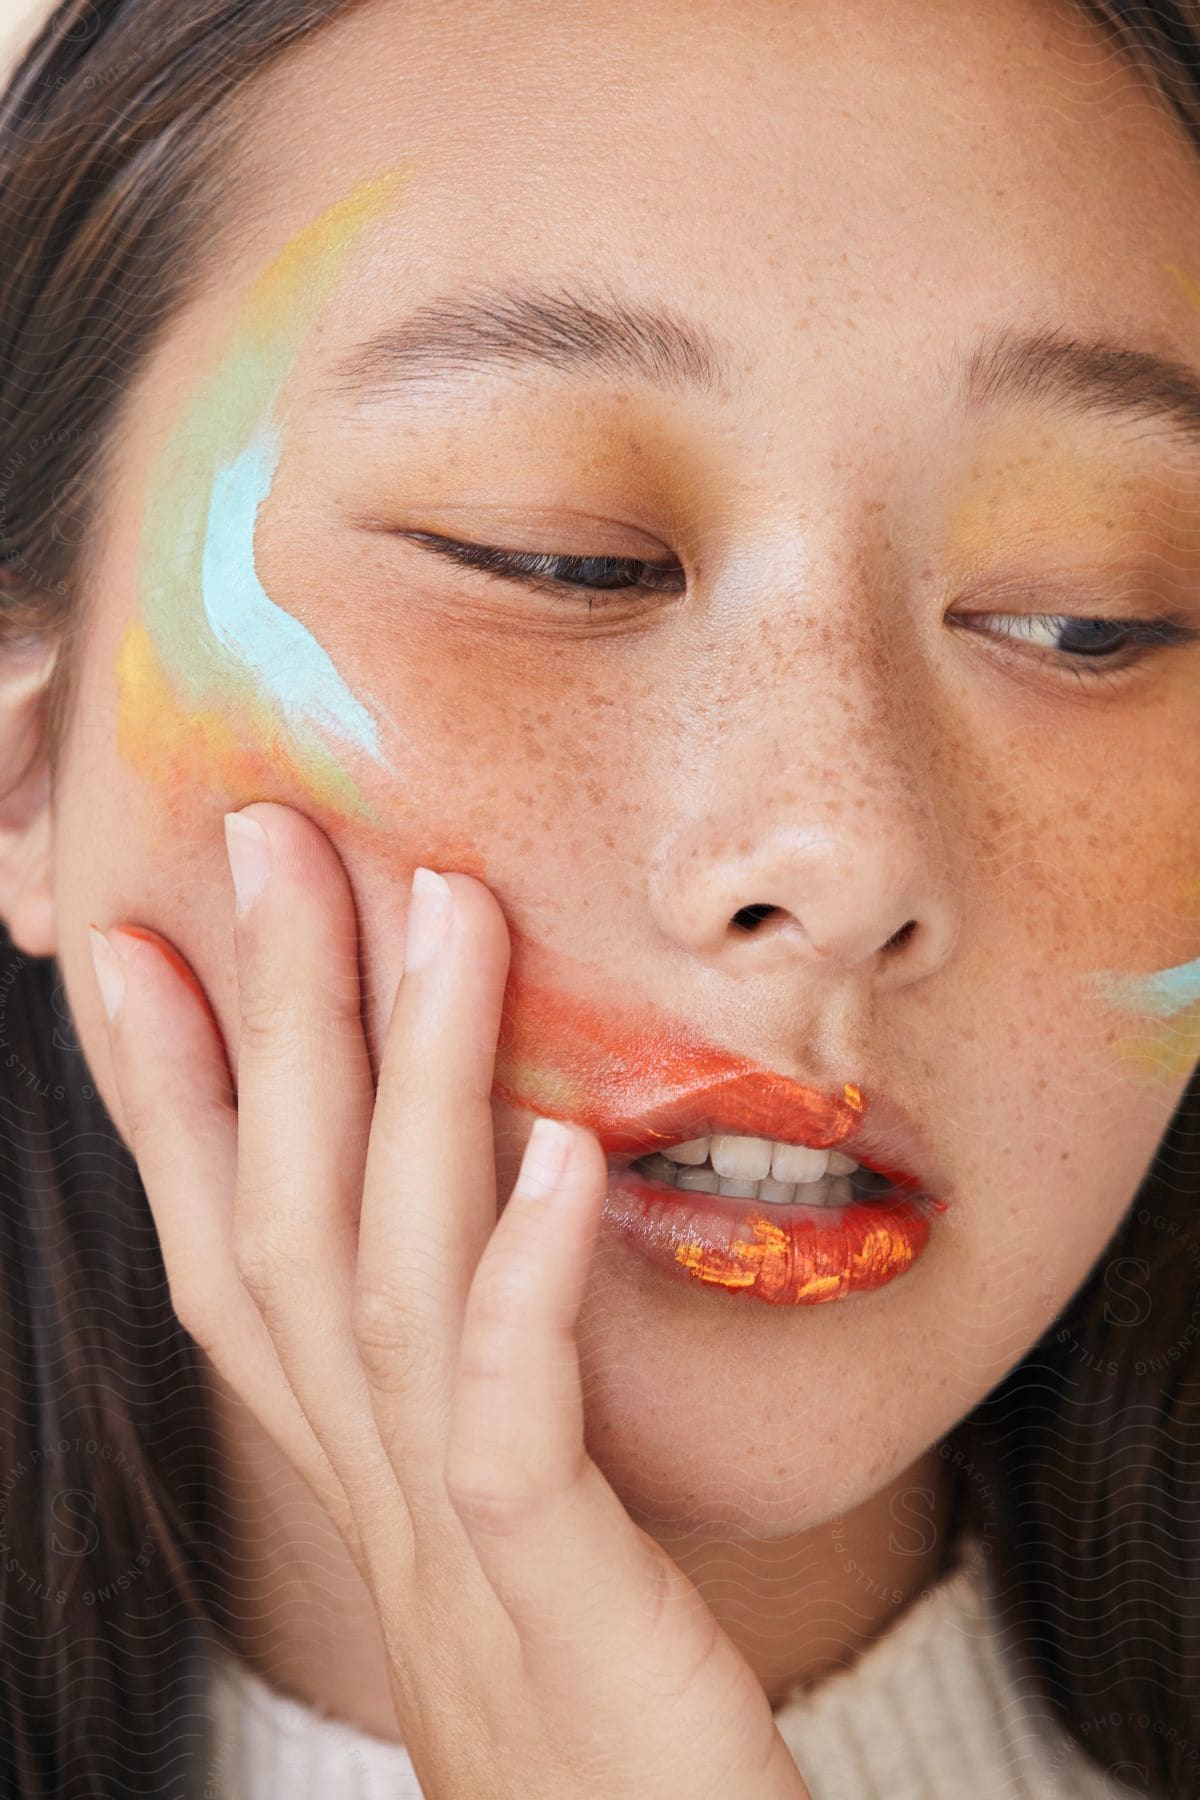 Asian teen with freckles and paint on her face posing in a pensive mood.